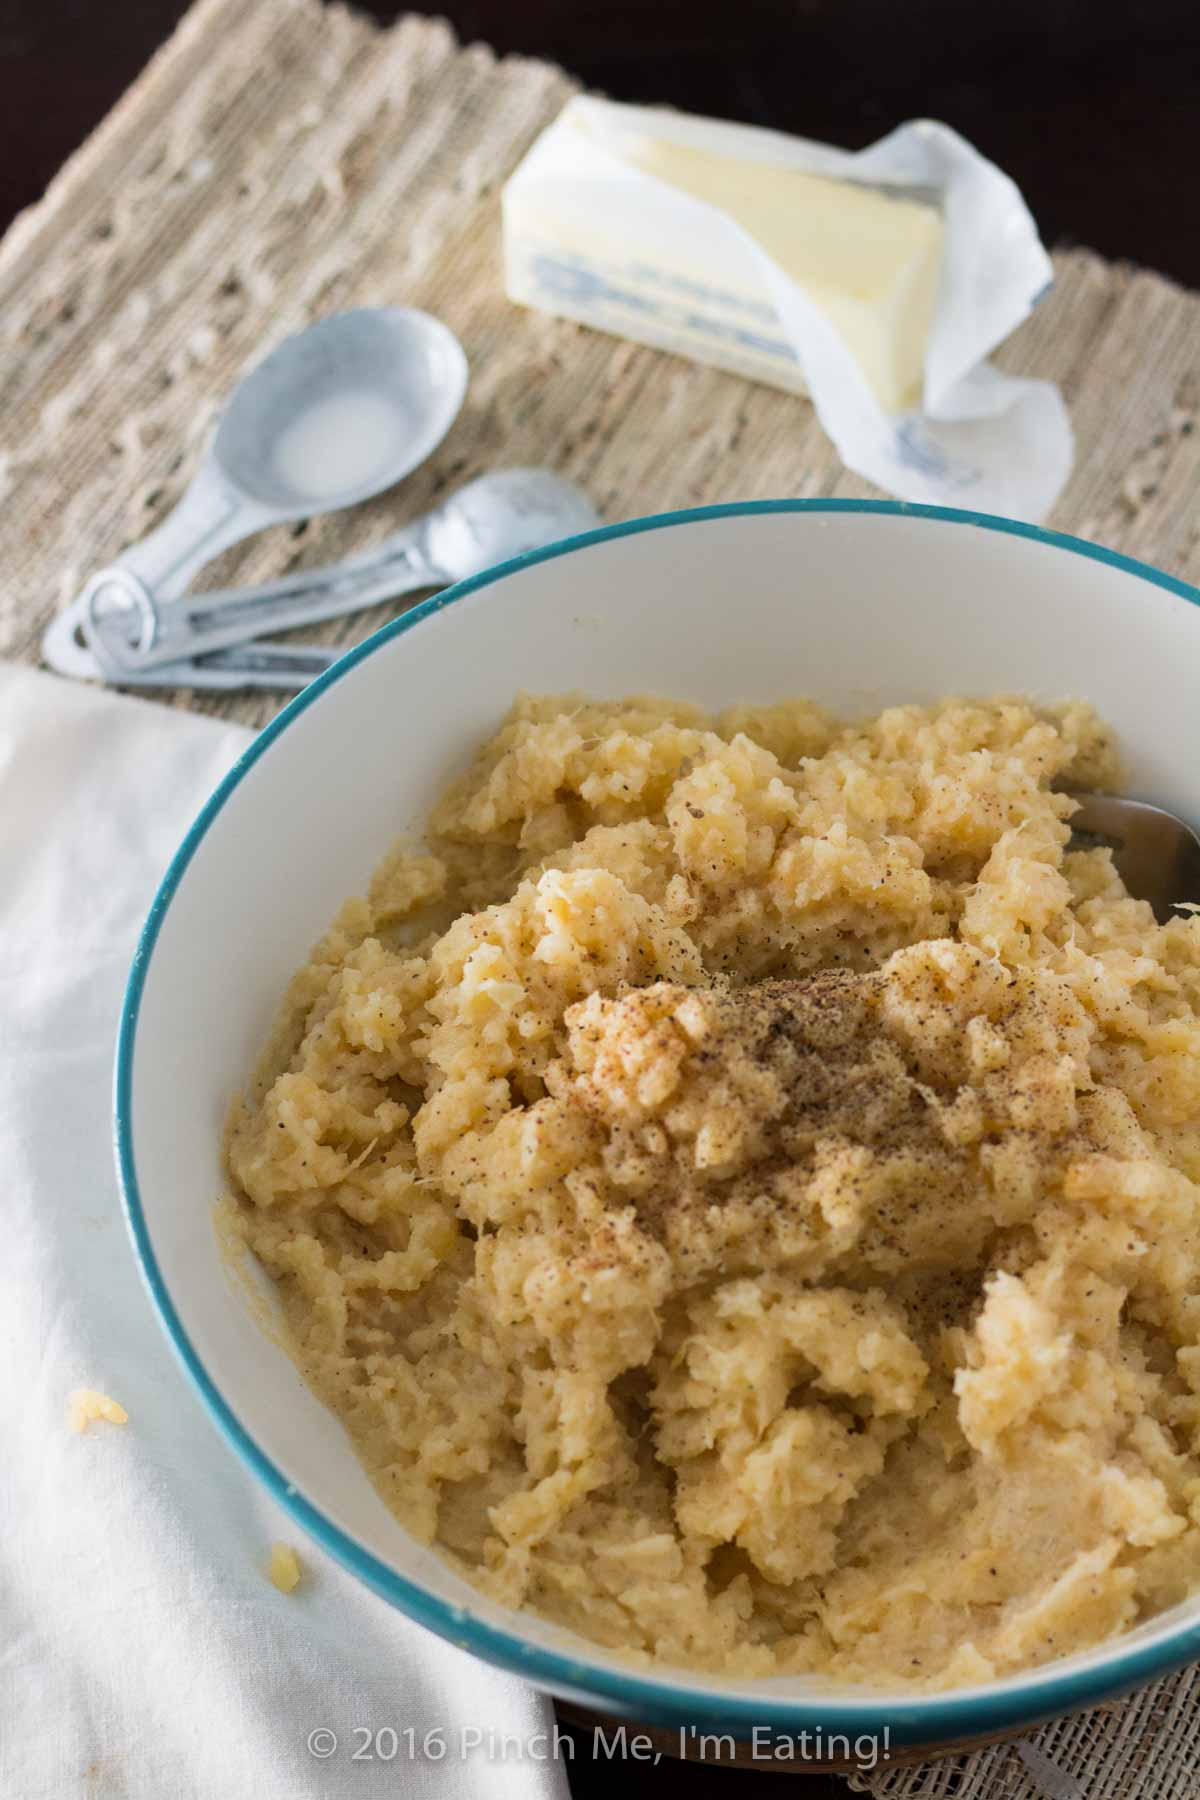 Mashed rutabaga is a delicious, naturally sweet low-carb Thanksgiving side dish made even better with a little nutmeg. You won't want to go back to potatoes! | www.pinchmeimeating.com